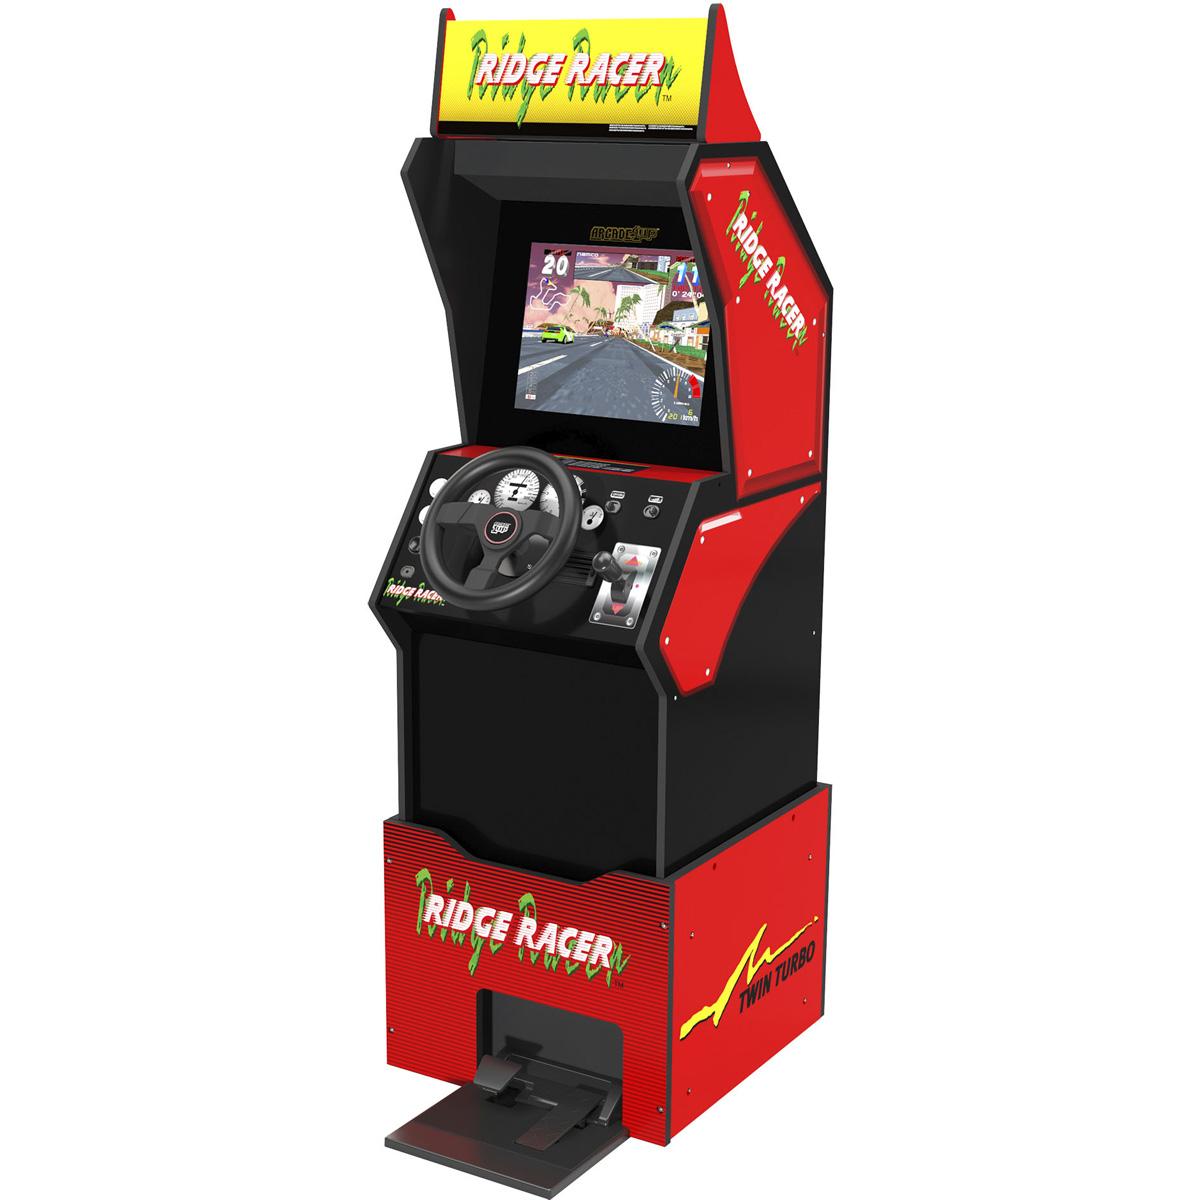 Arcade1Up Ridge Racer Stand Up Arcade Machine for $299.99 Shipped